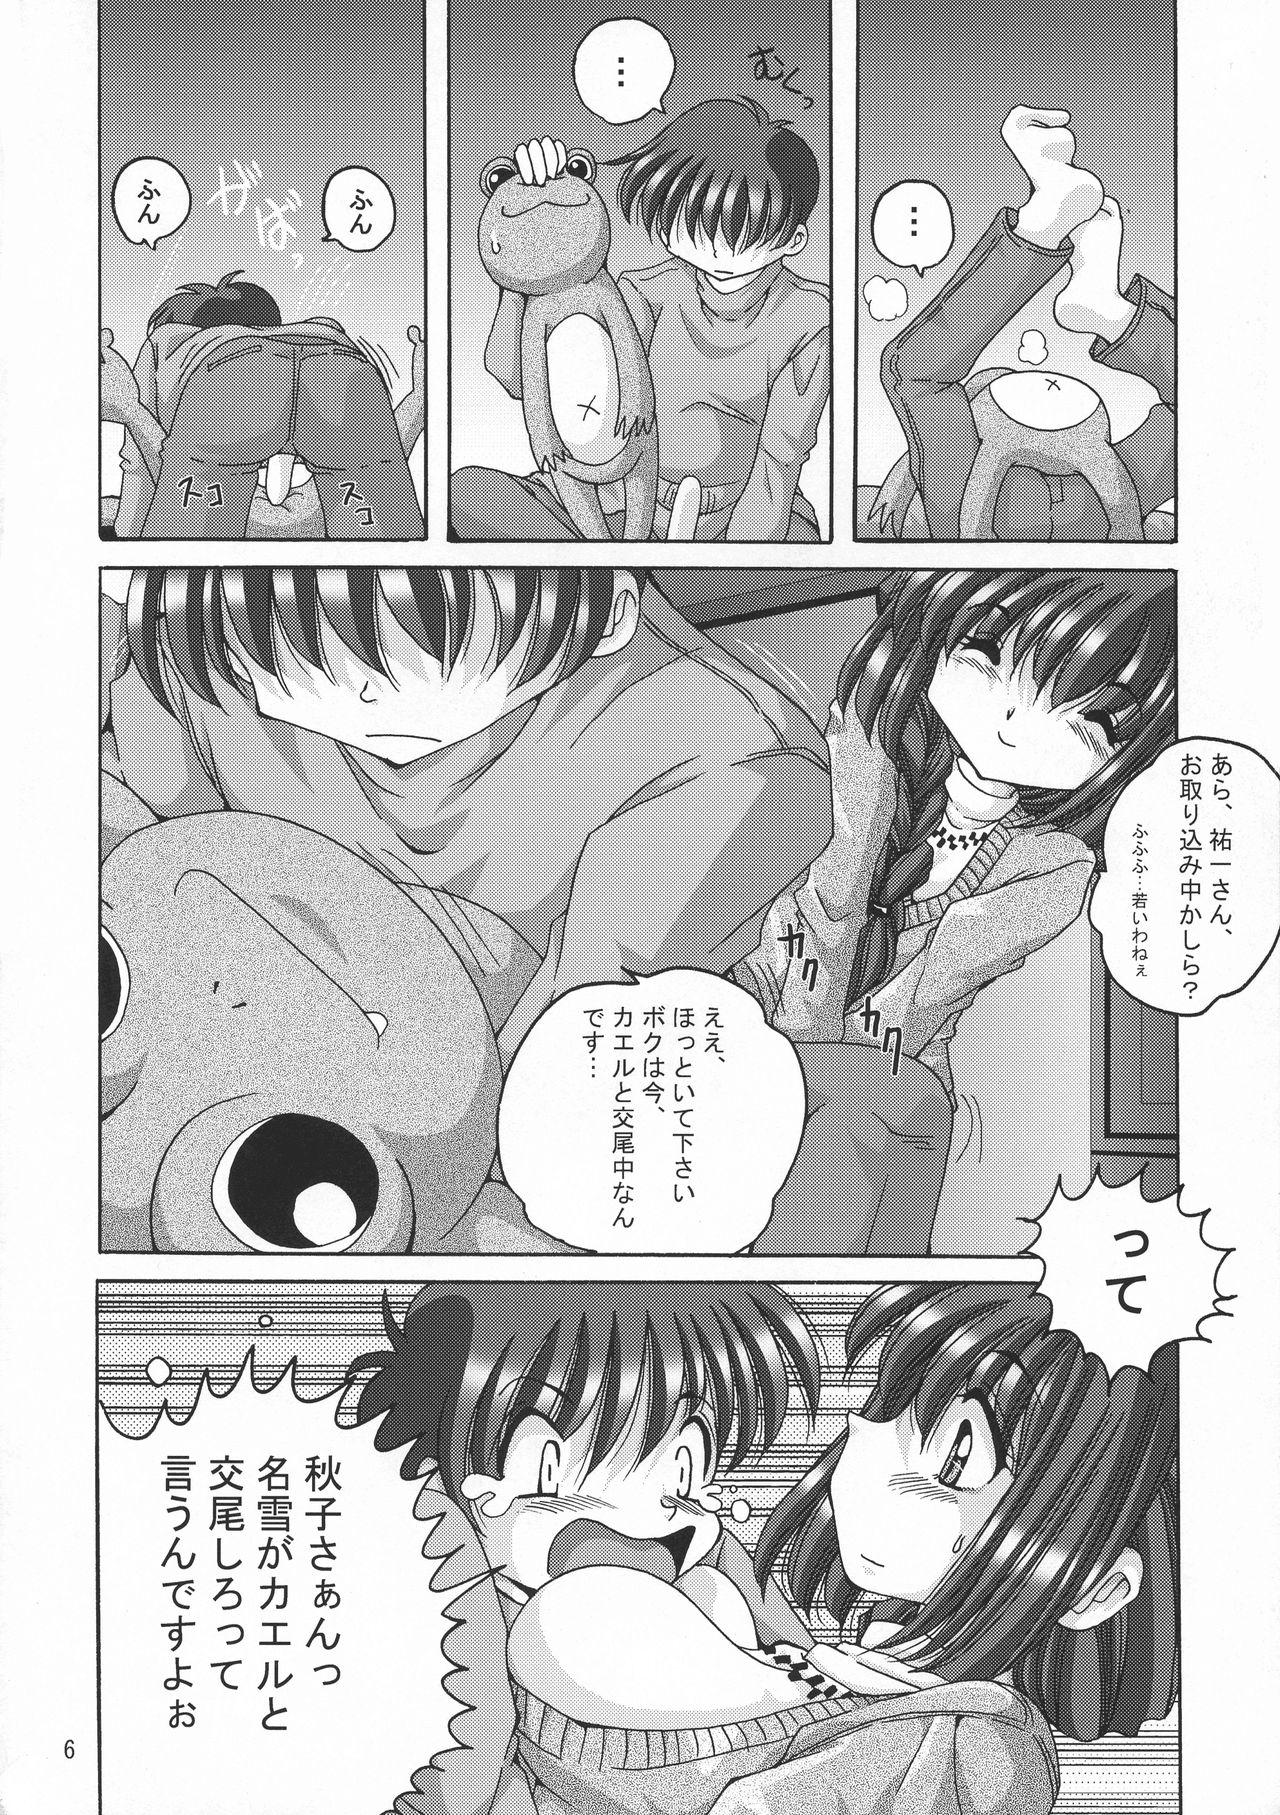 Wet V-TIC 37 - Kanon Viet - Page 6